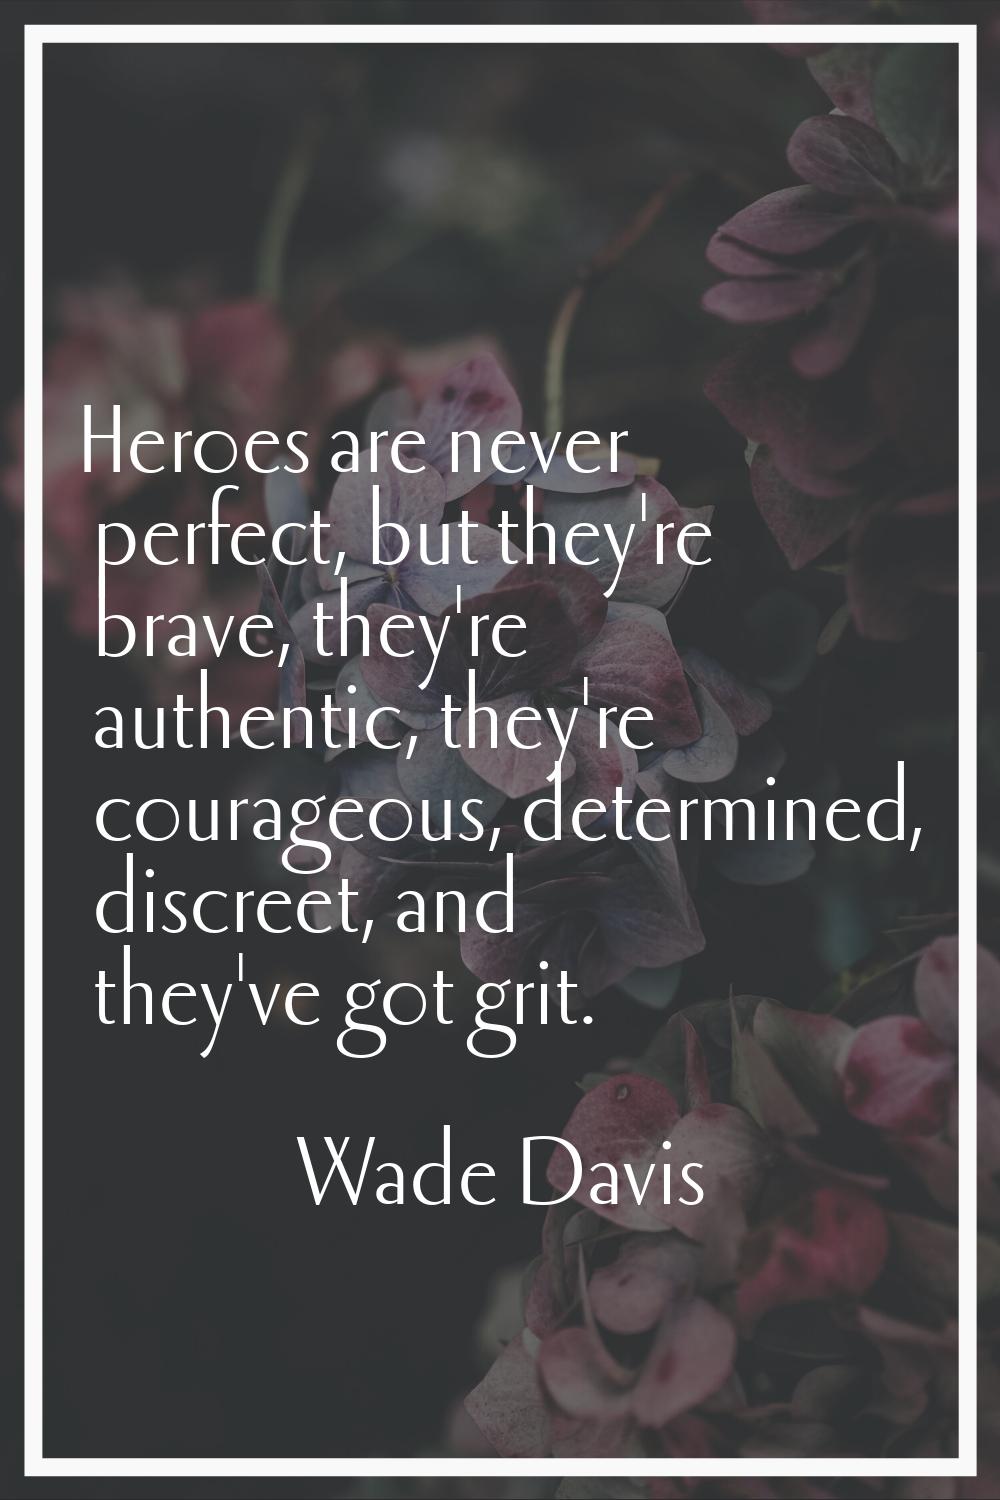 Heroes are never perfect, but they're brave, they're authentic, they're courageous, determined, dis